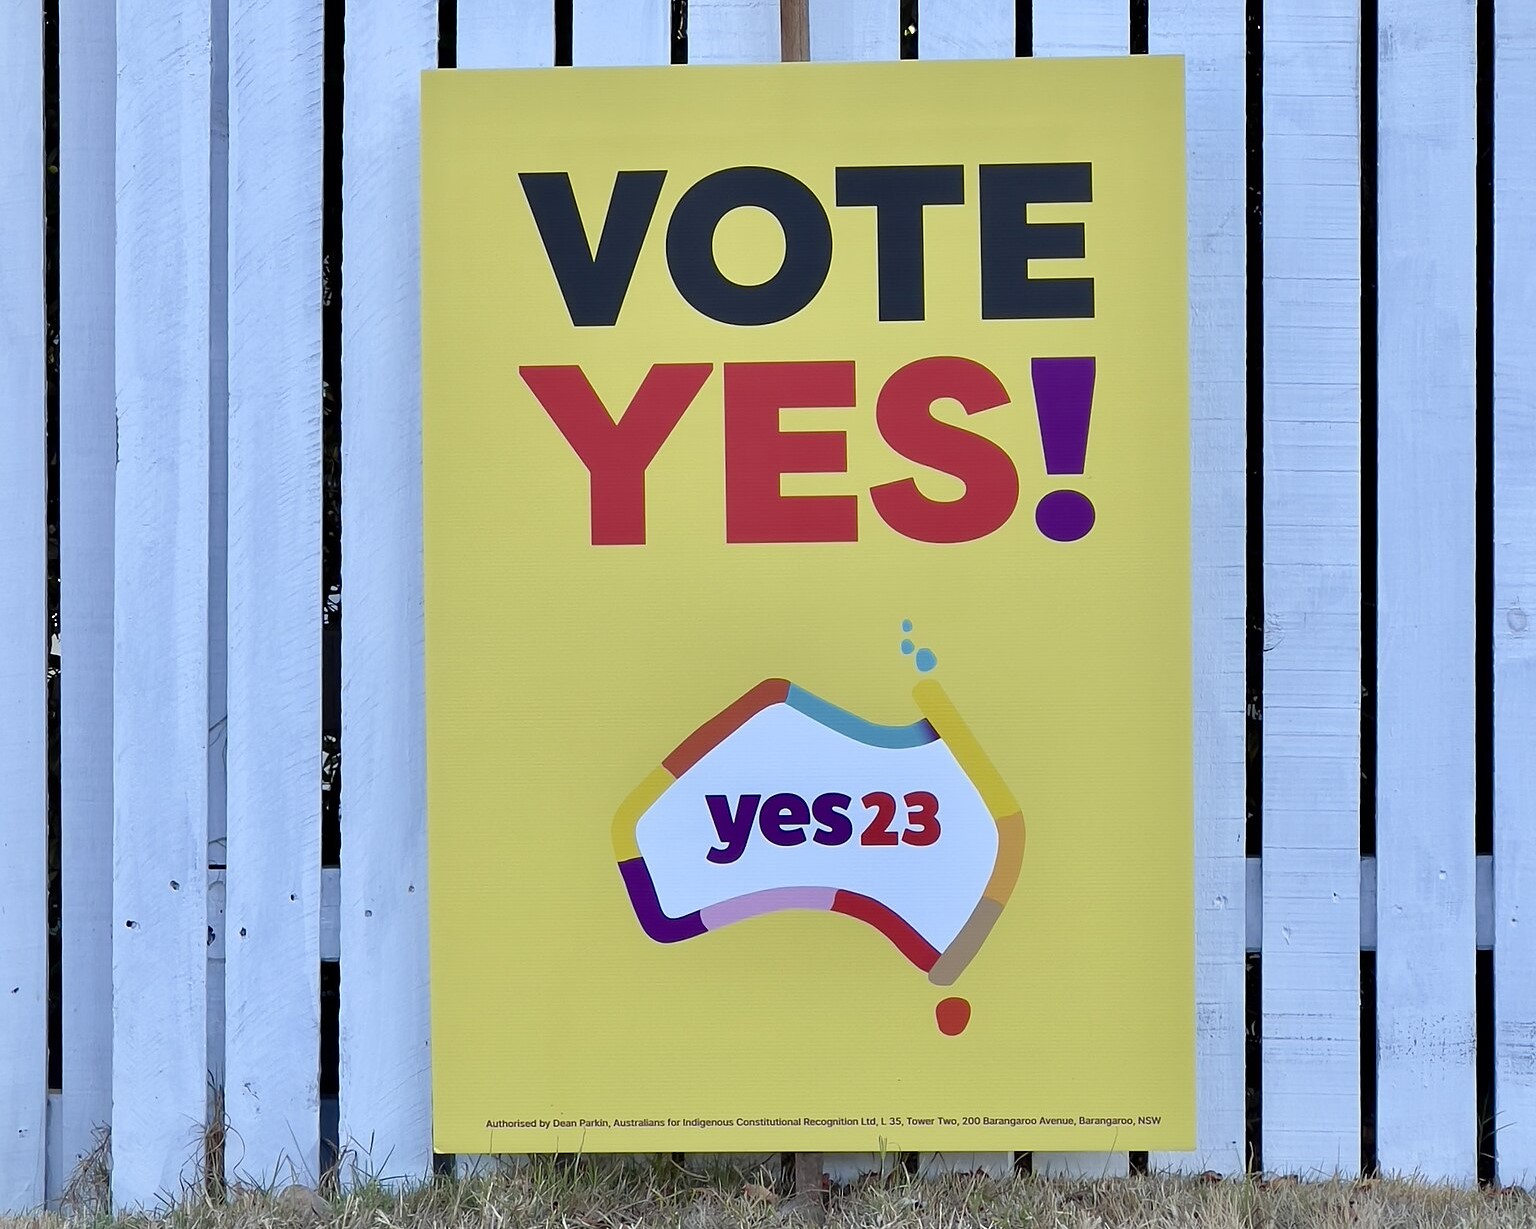 Vote Yes Image Kgbo Wikimedia Commons